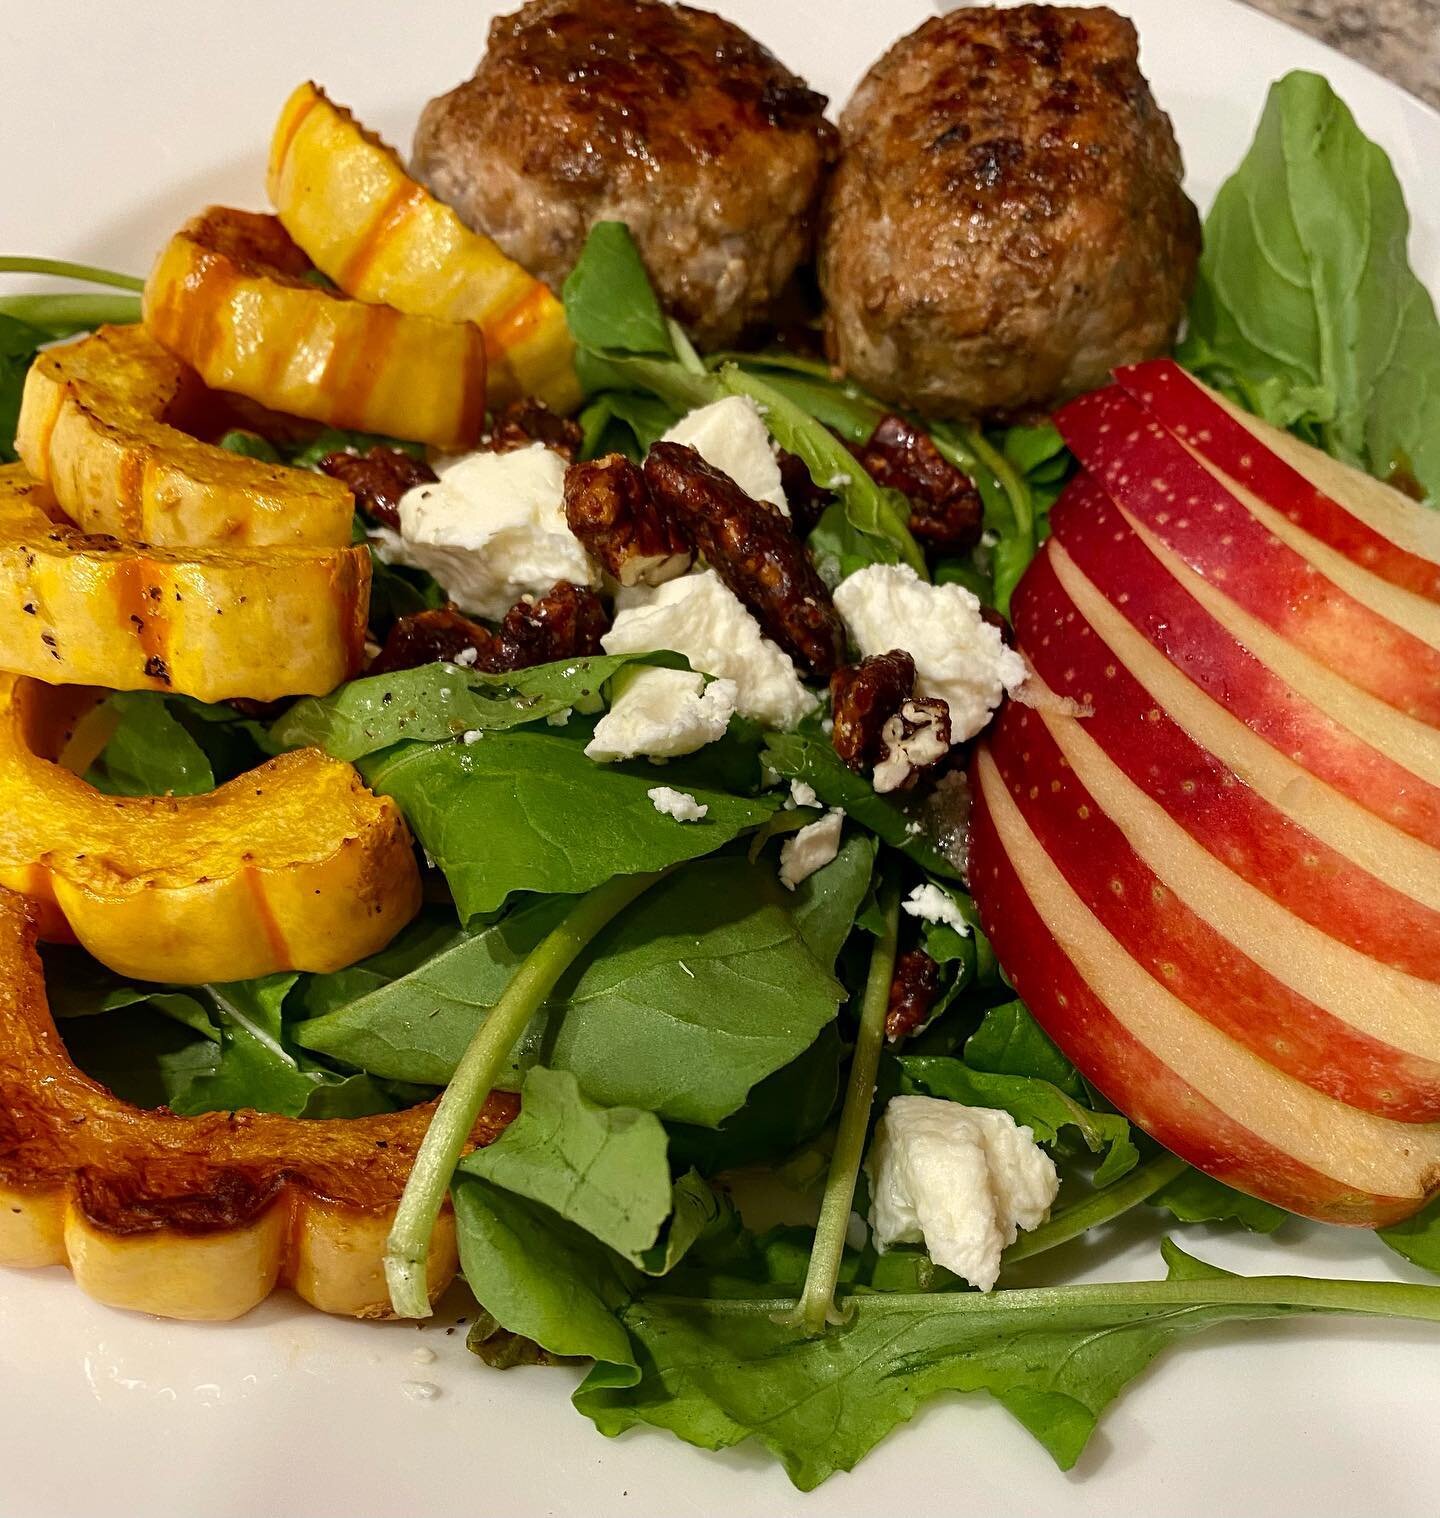 🍽 On the Menu 🍽

Turkey Meatballs with Delicata Squash and Arugula Apple Salad 🍎 

I feel like this recipe hits all the autumn notes! 

We use ground turkey and mix in grated apple, garlic, onion, sage and other spices to make sweet and savory mea